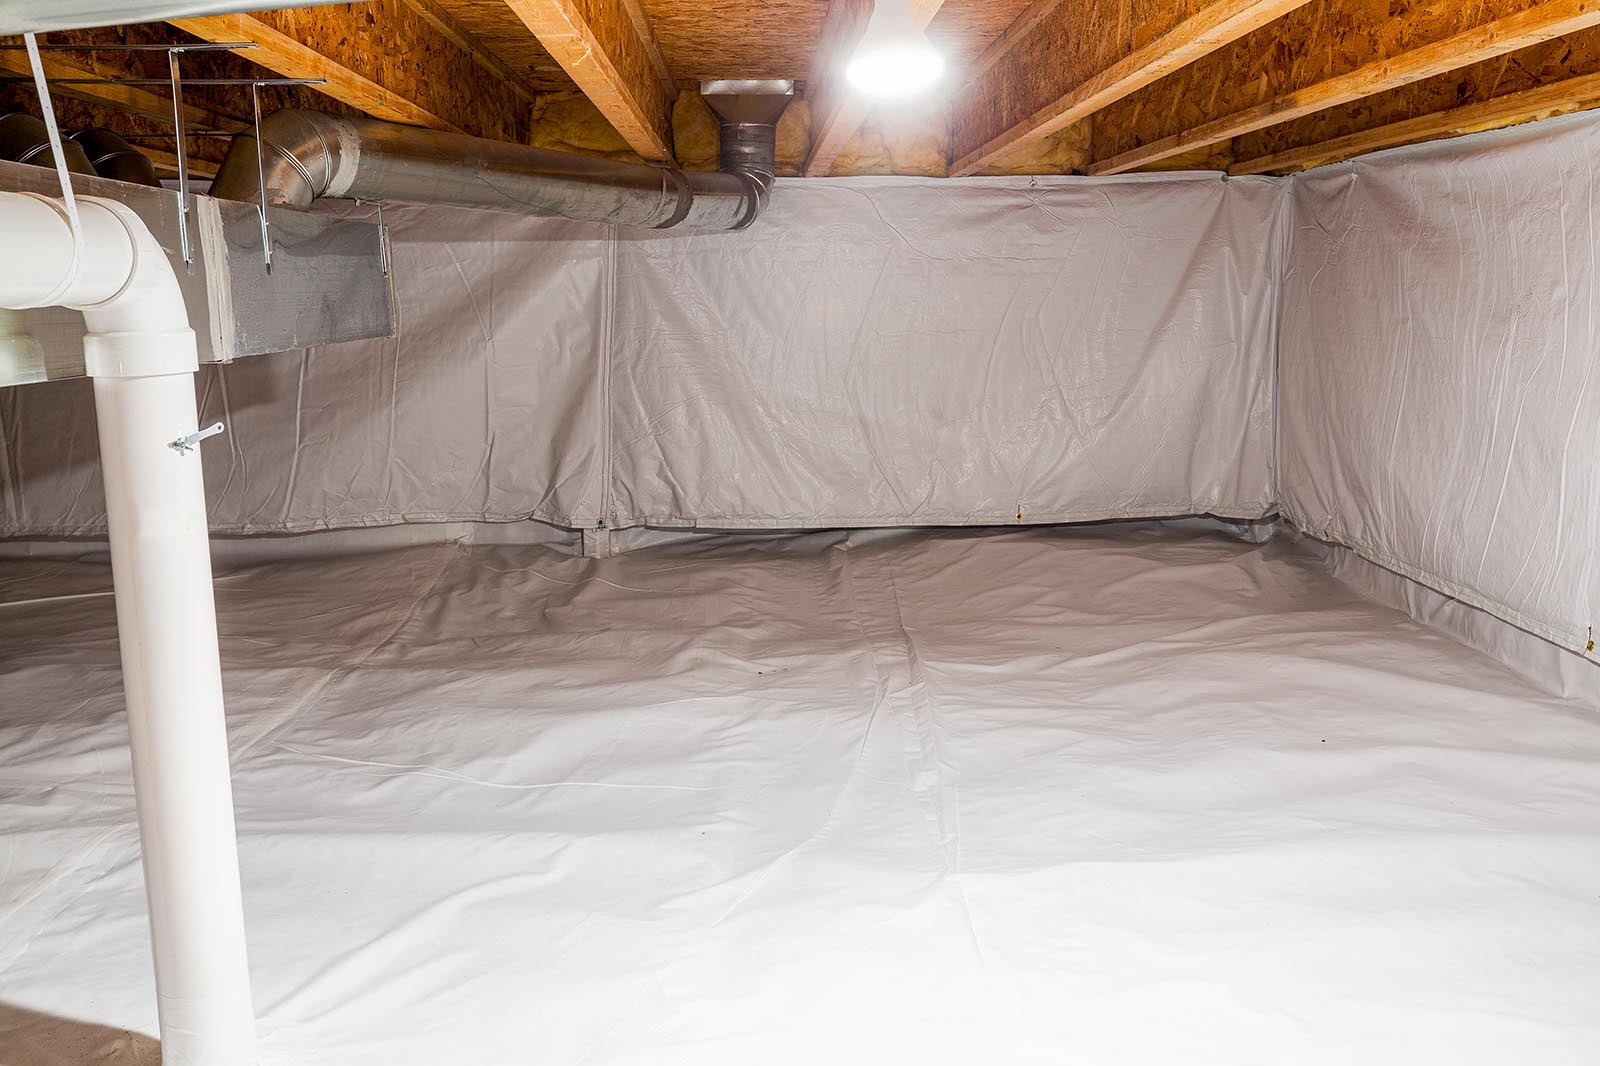 Crawl space fully encapsulated with thermoregulatory blankets and dimple board. Radon mitigation system pipes visible. Basement location for energy saving home improvement